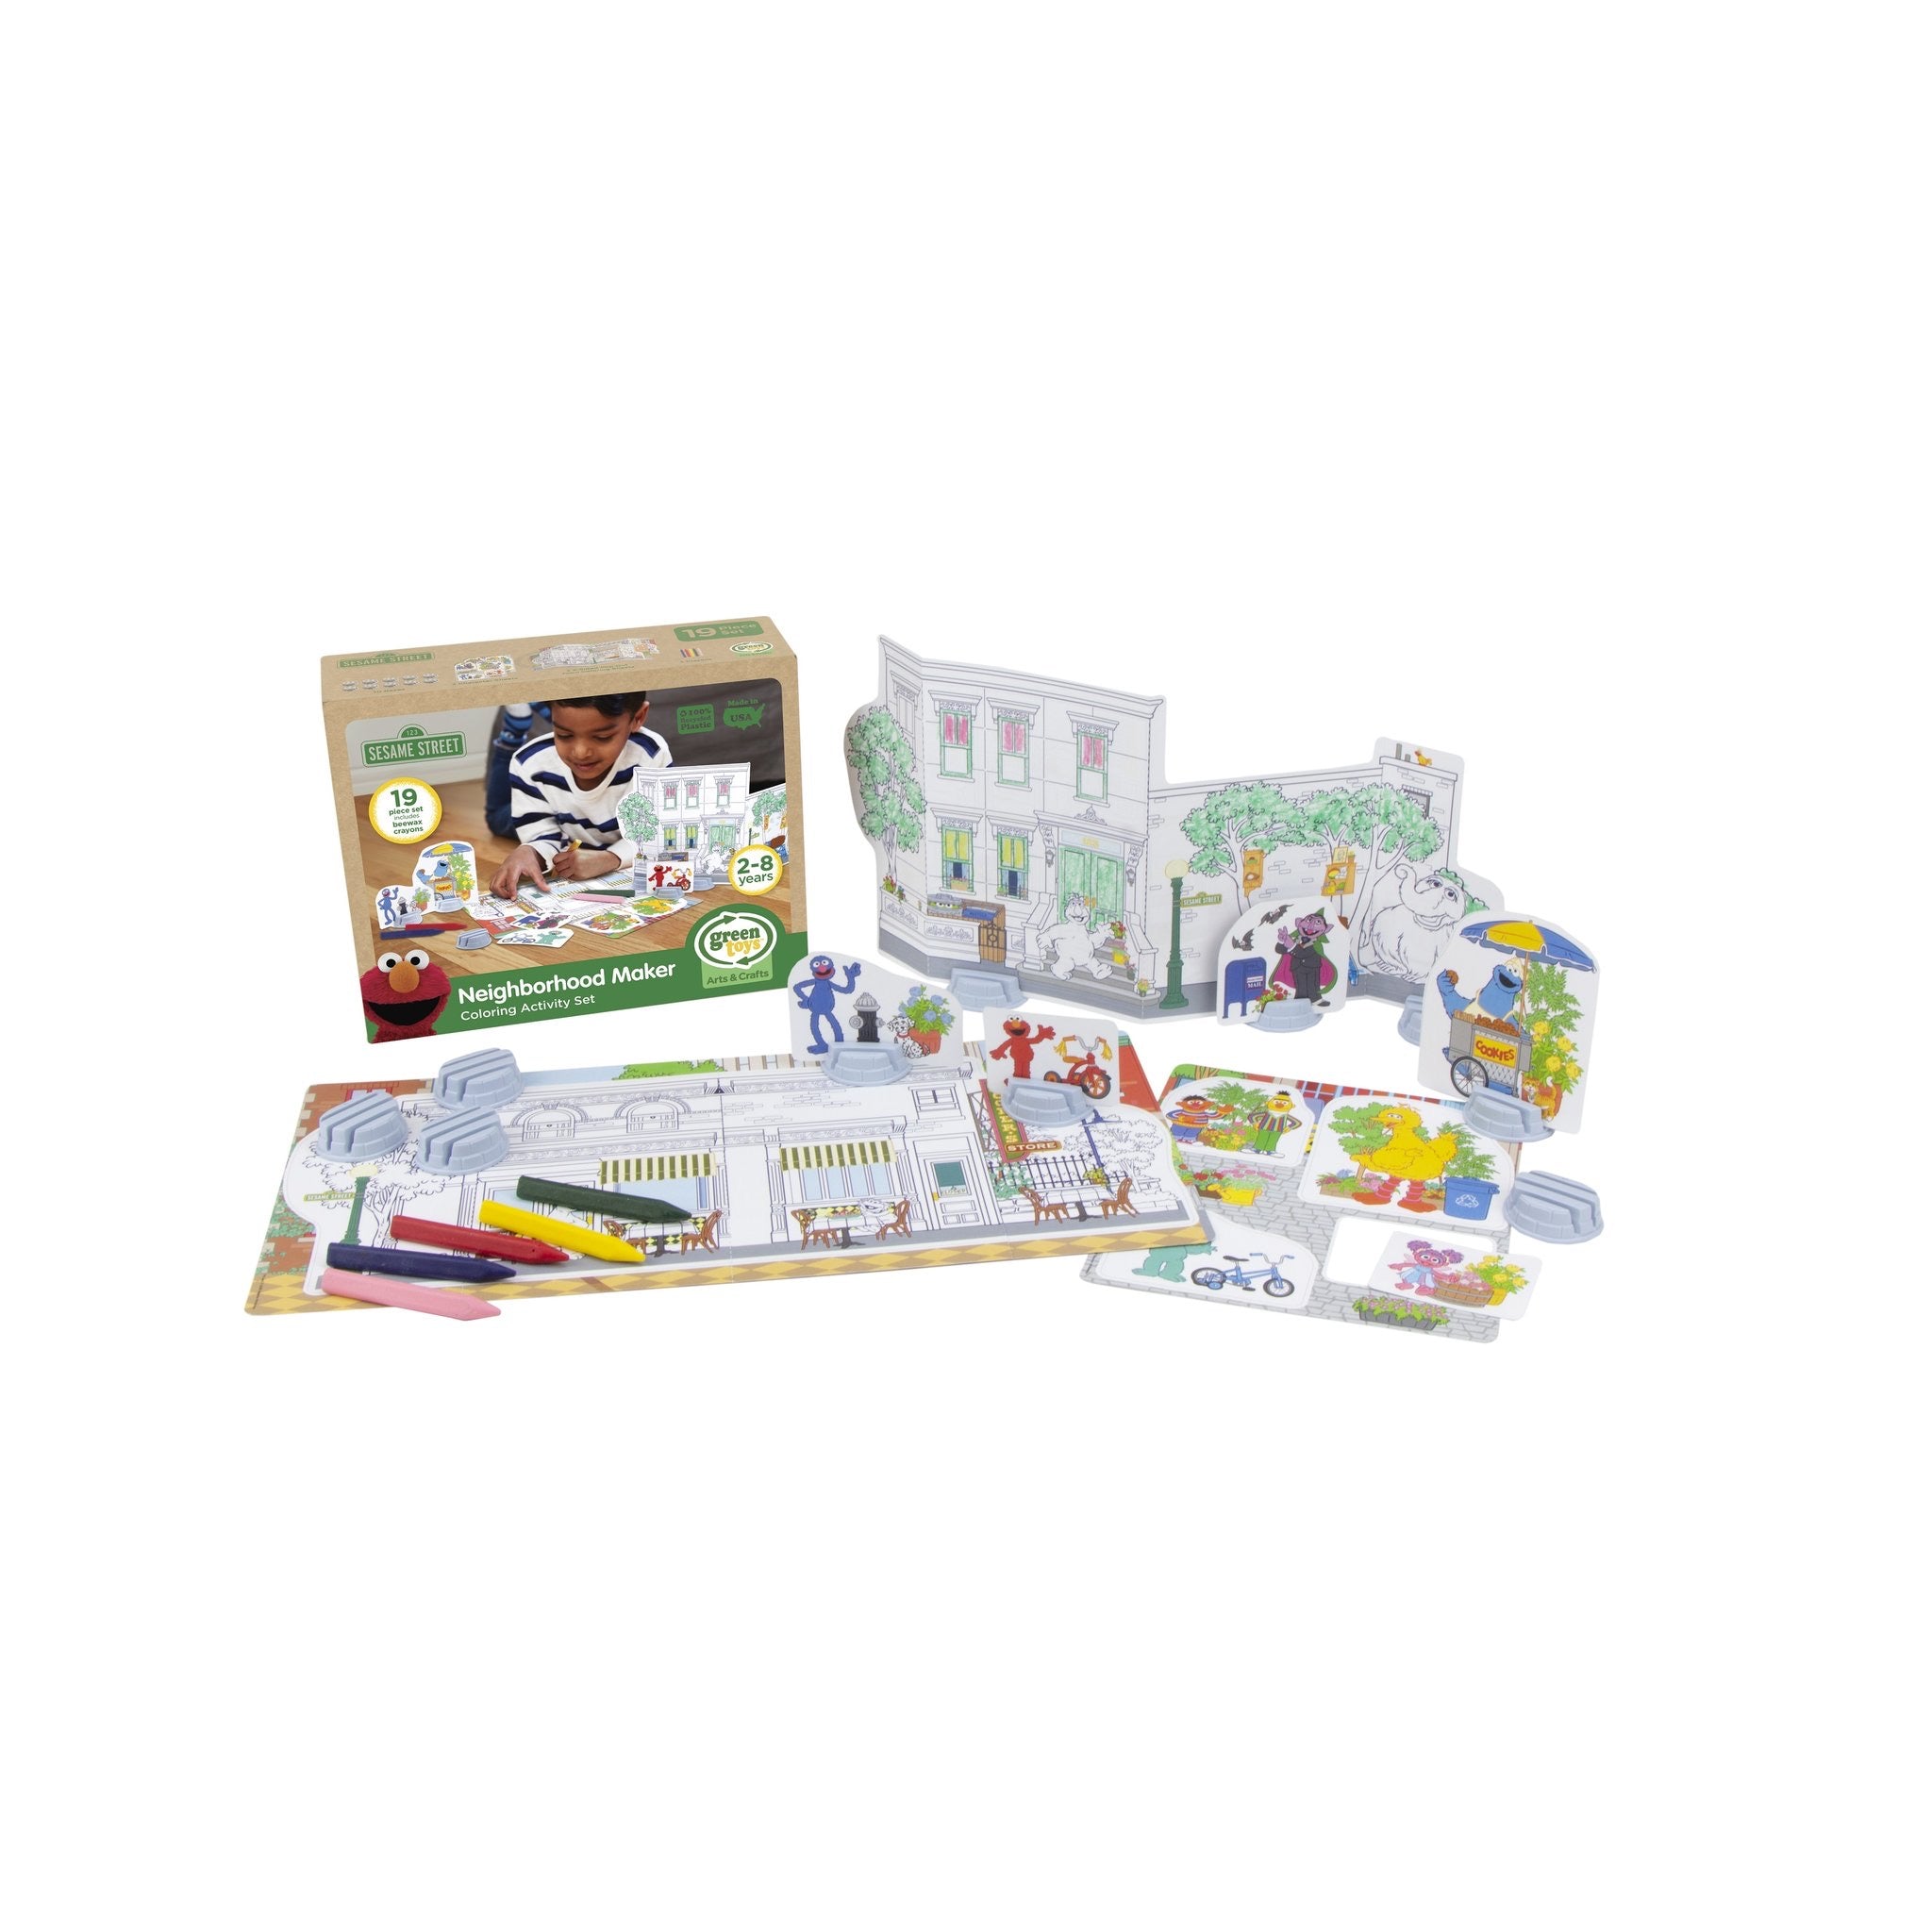 Neighborhood Maker Coloring Activity Set by Green Toys